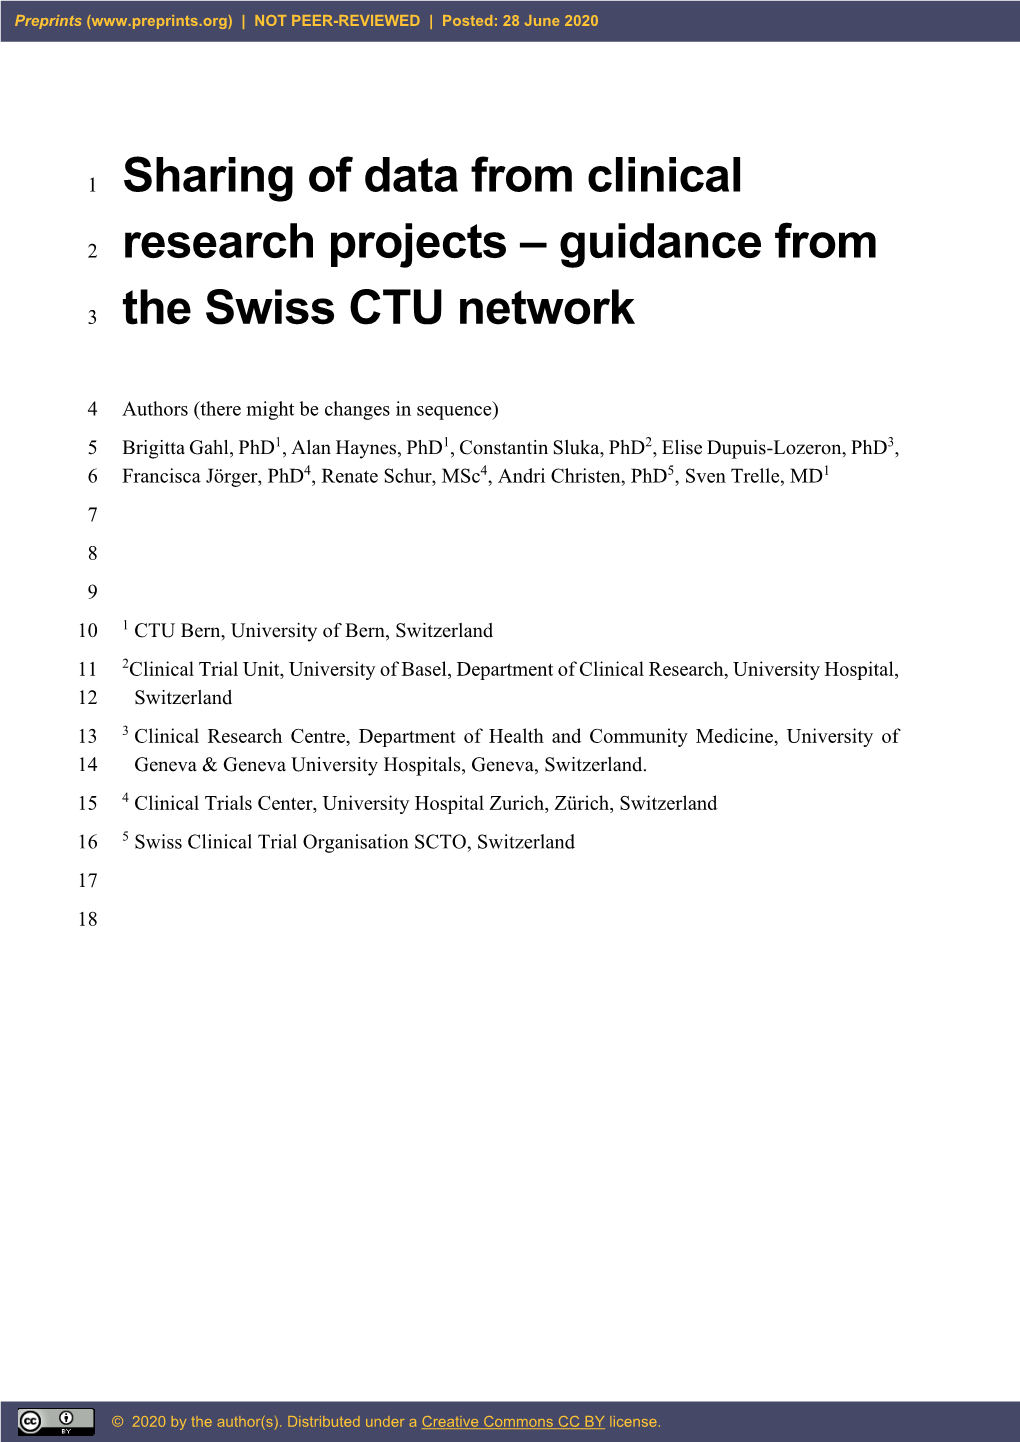 Sharing of Data from Clinical Research Projects – Guidance from the Swiss